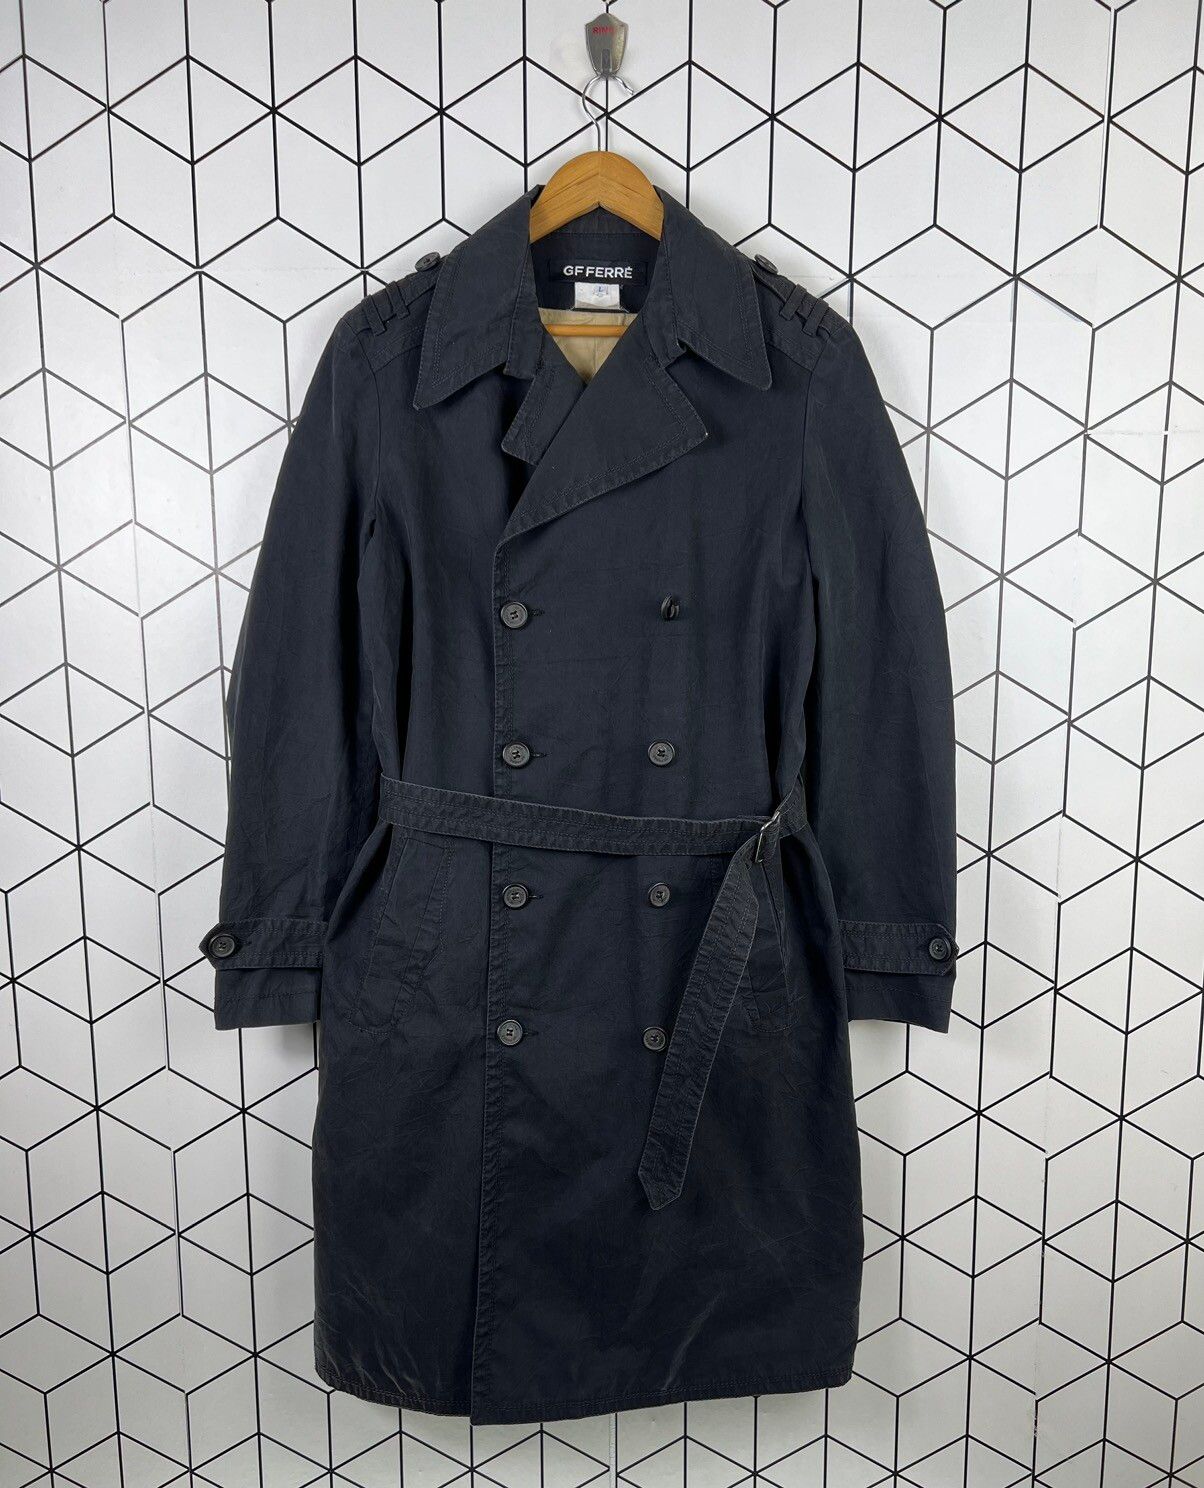 Gf Ferre GF FERRE Trench Coat Long Jacket Made in Italy | Grailed